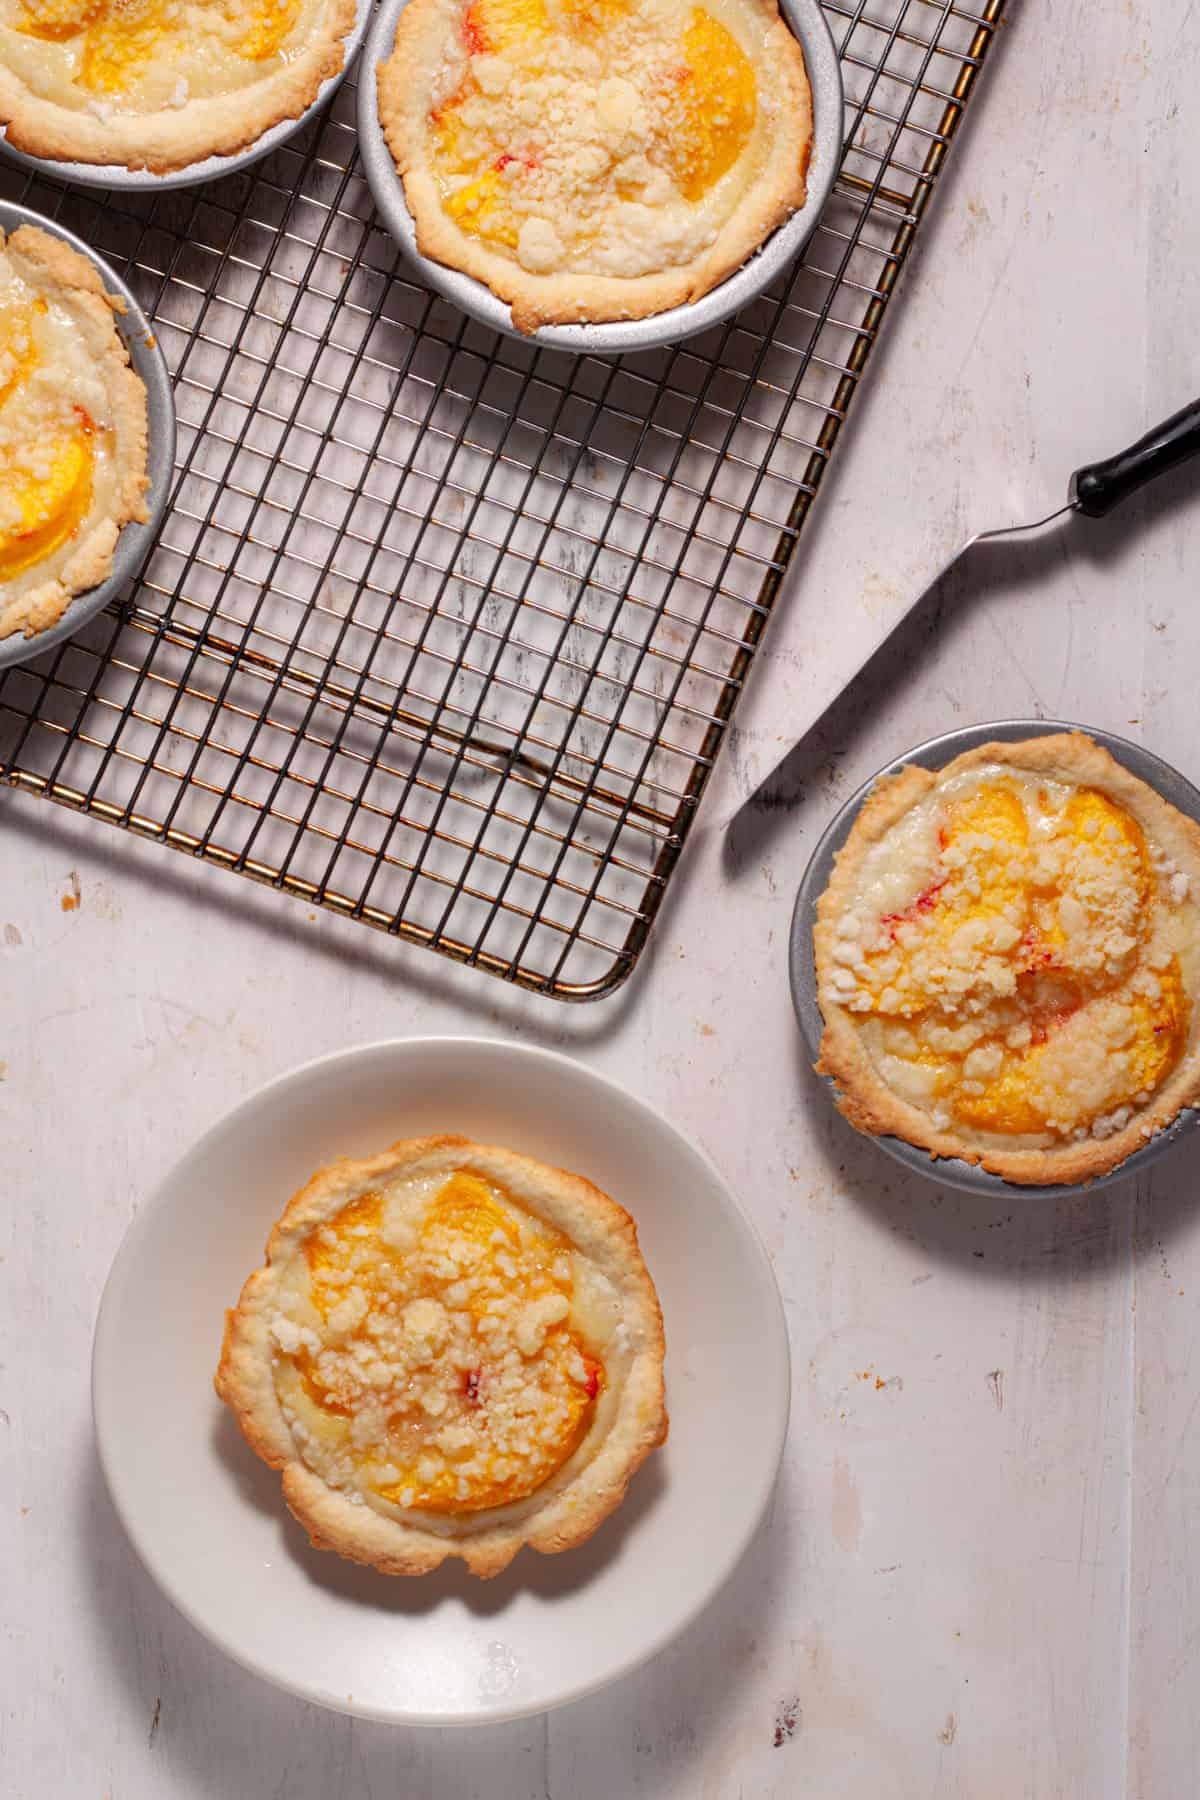 Mini peach custard pies on a small plate and others cooling in the background.